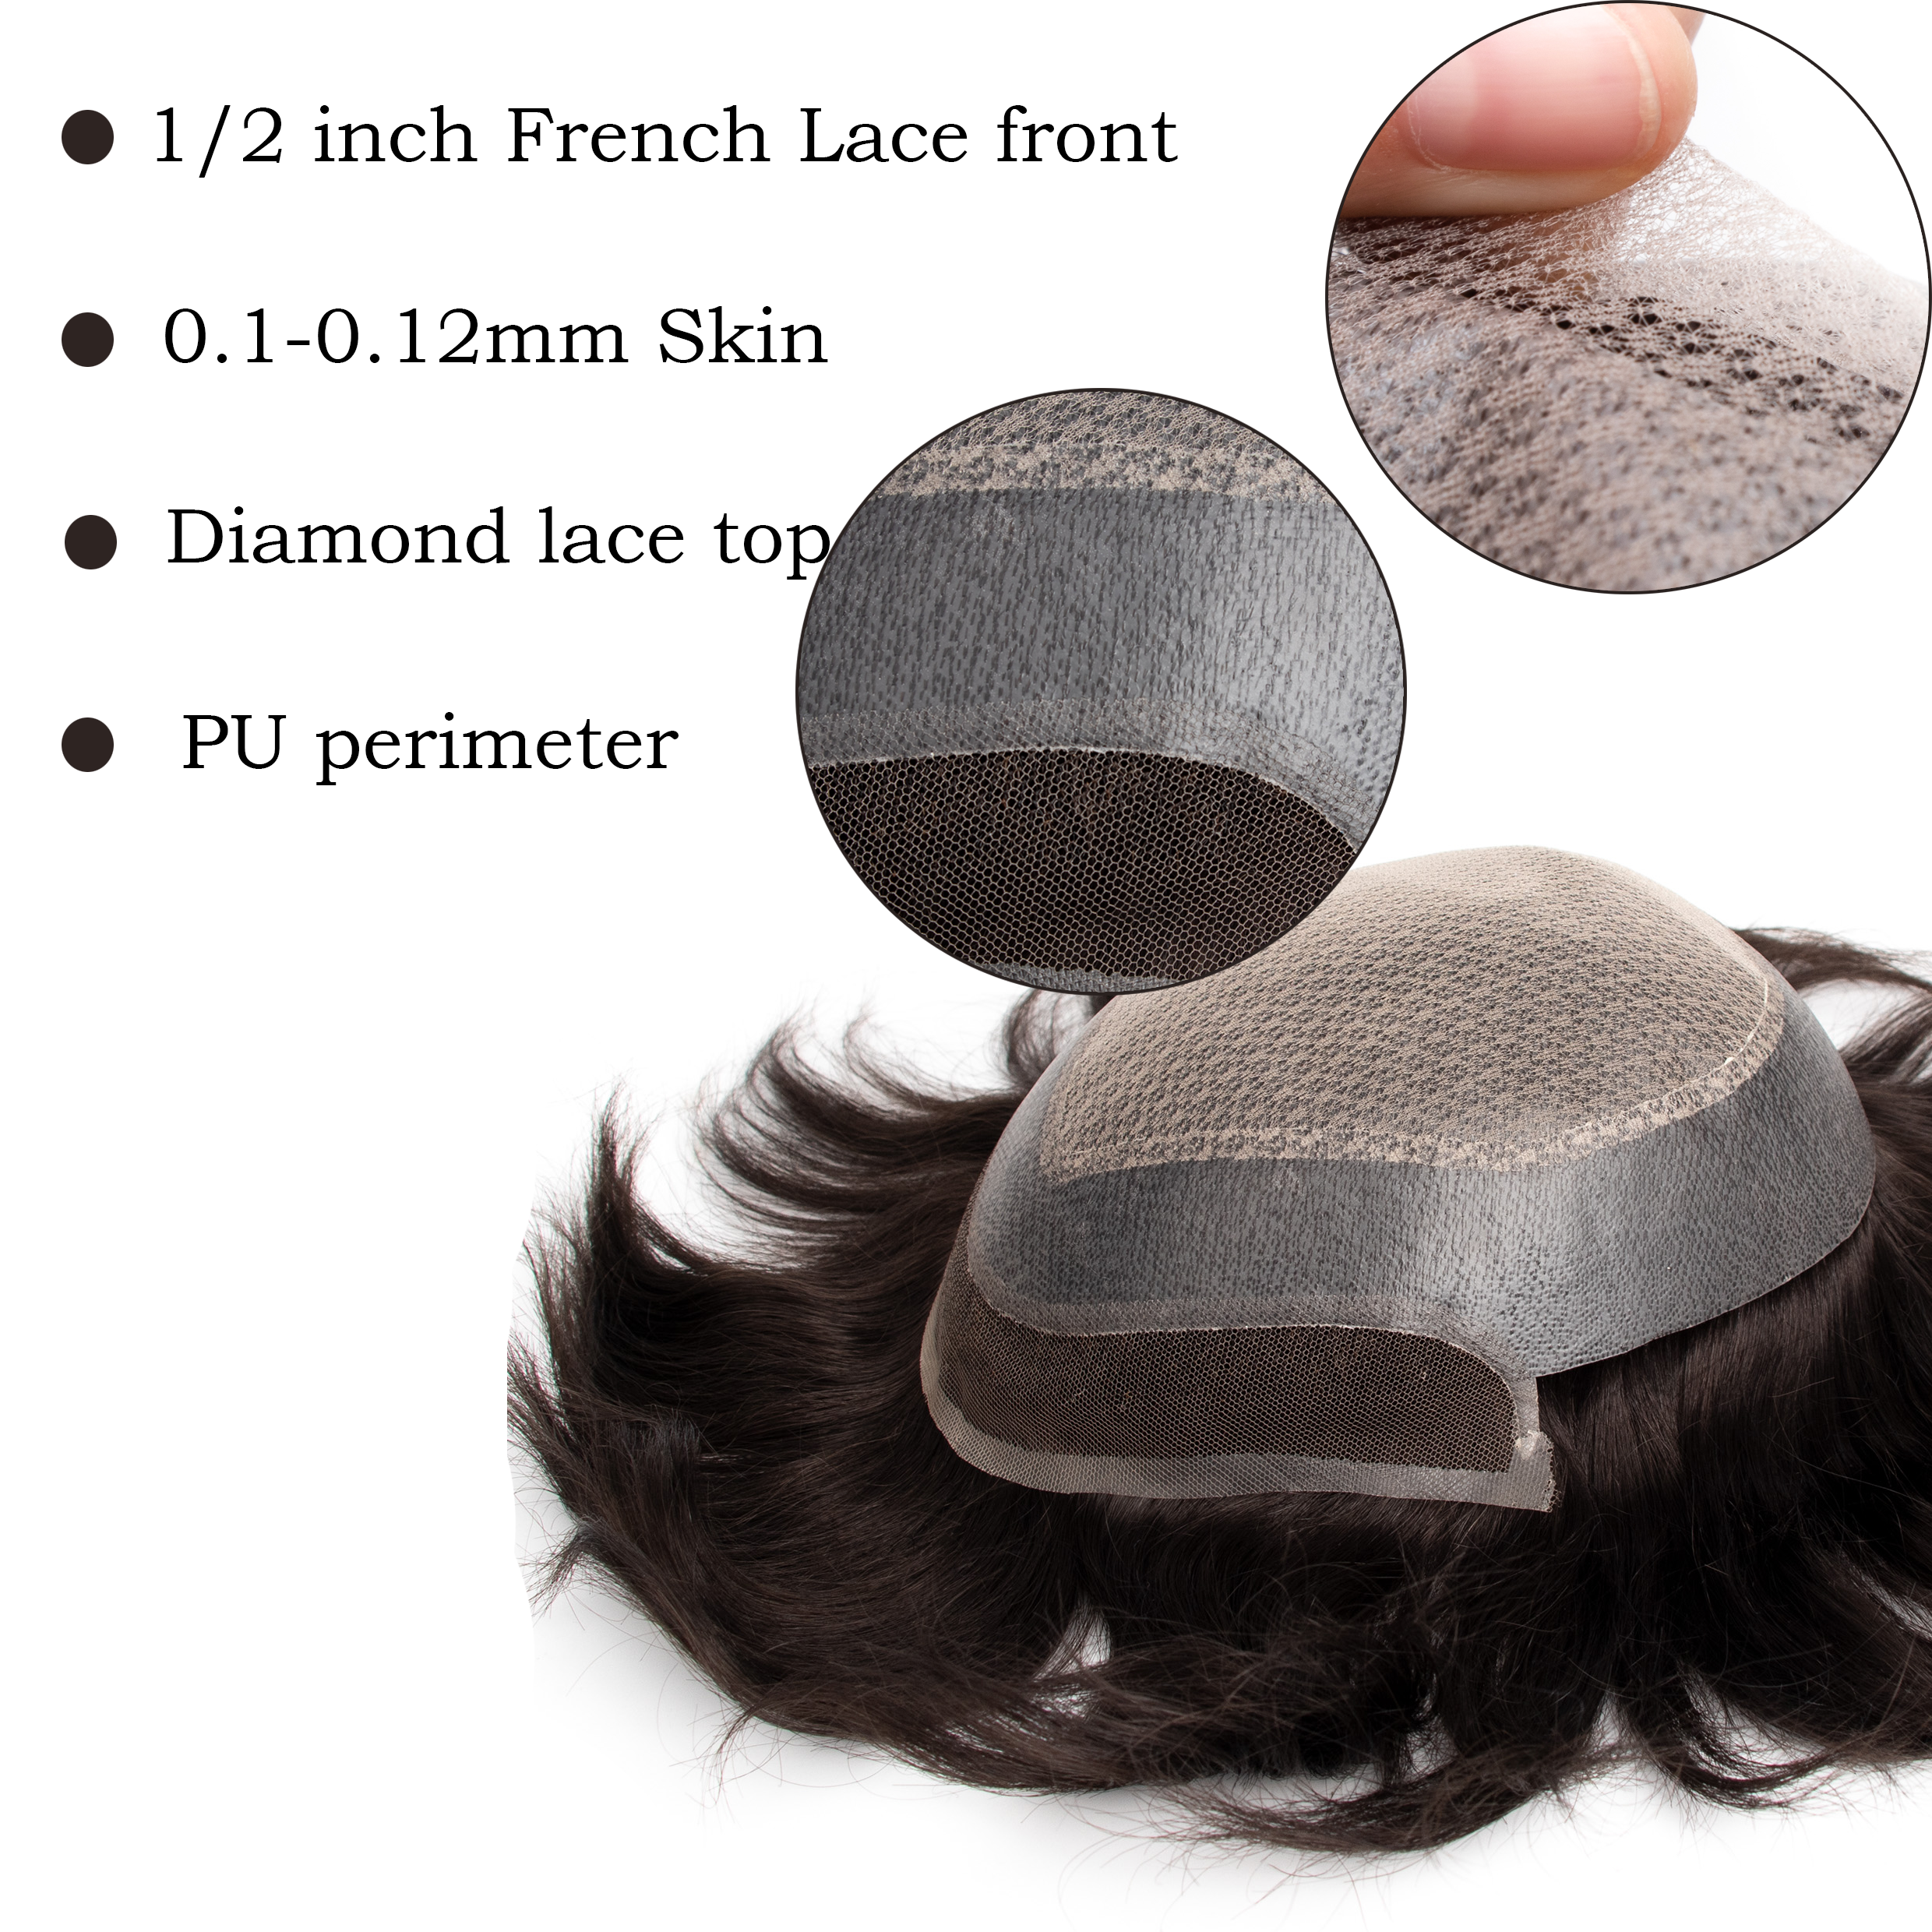 GEXWIGS Men's Hairpiece Injection Skin Lace Center French Lace Front Diamond net | I-Lace.